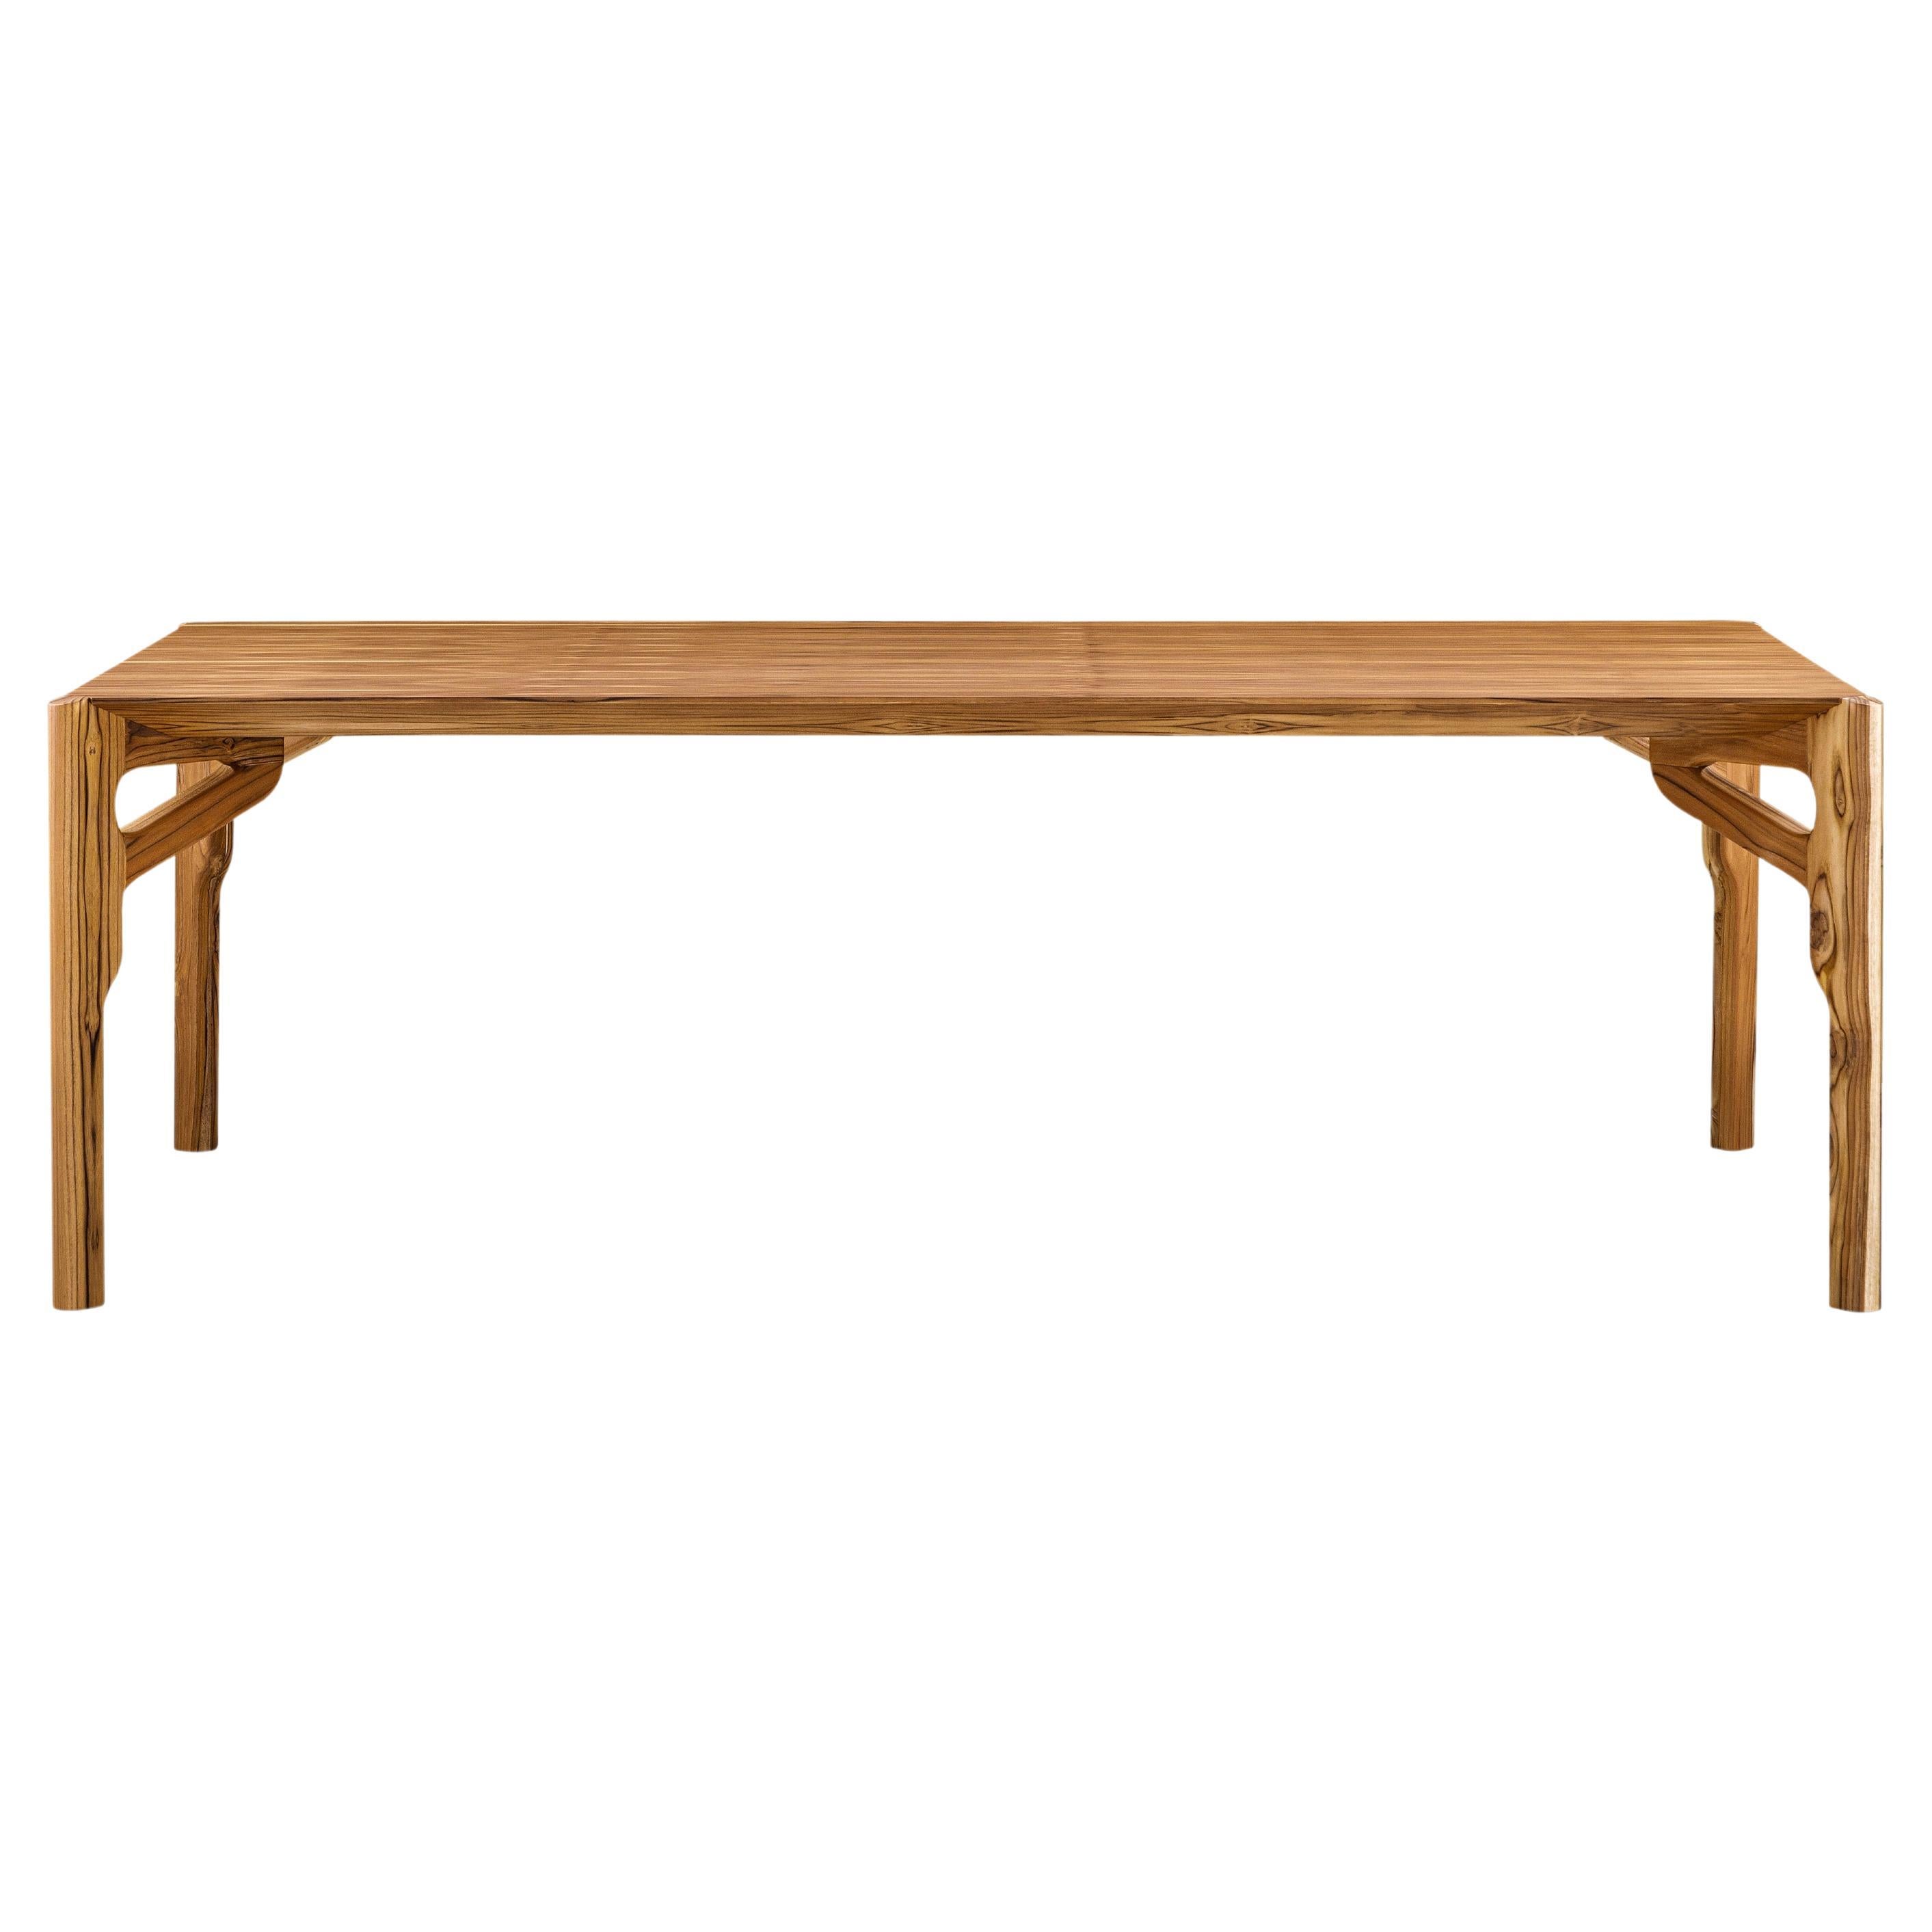 Hawk Dining Table with a Teak Wood Veneered Table Top 70'' For Sale